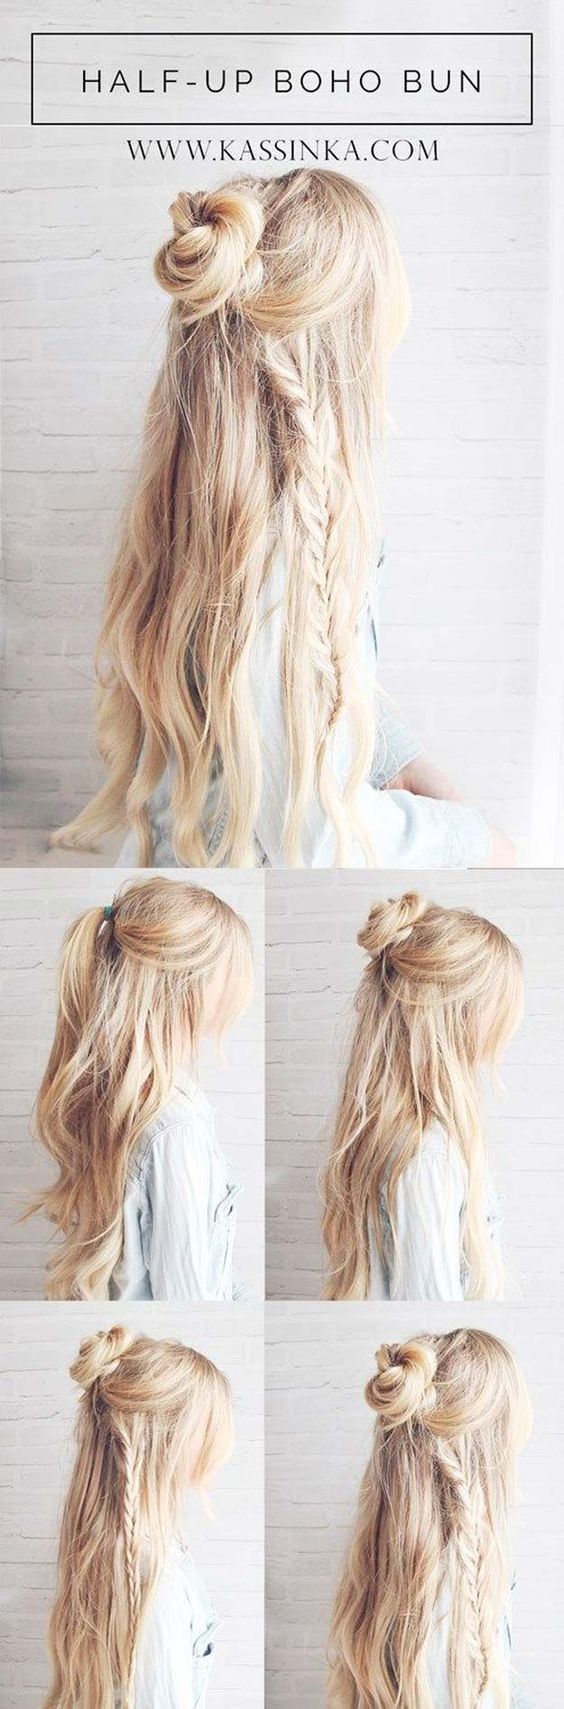 Best Hairstyles for Long Hair - Boho Braided Bun Hair - Step by Step Tutorials for Easy Curls, Updo, Half Up, Braids and Lazy Girl